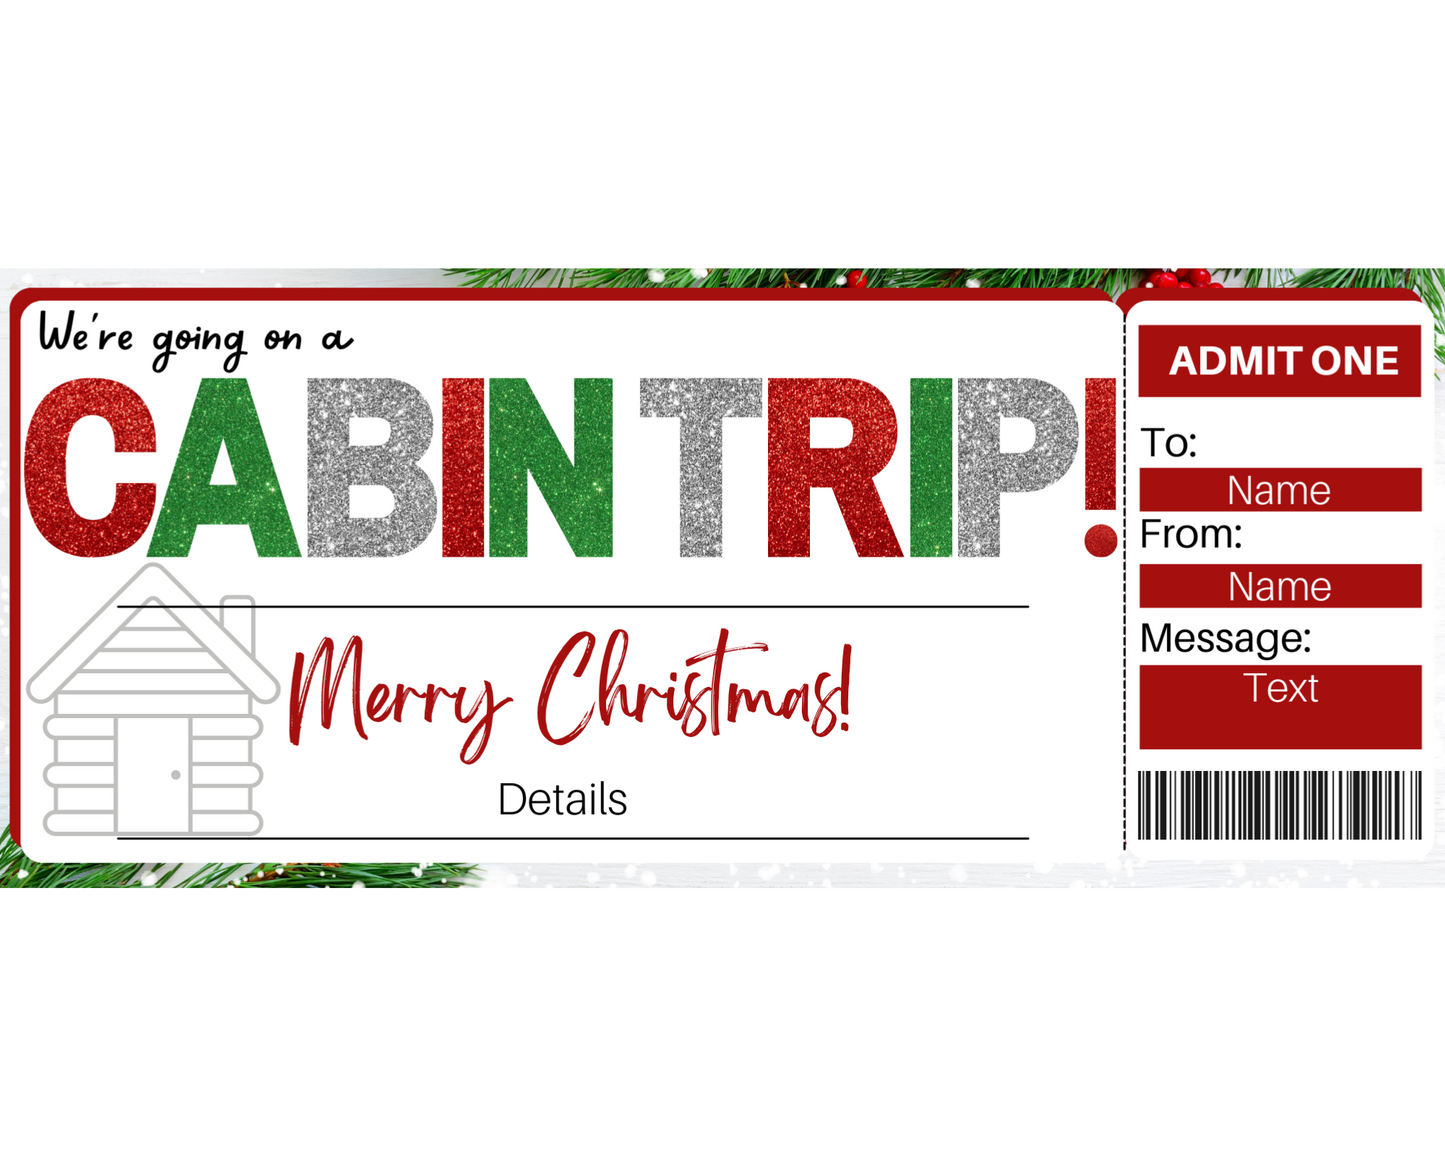 Christmas Cabin Trip Gift Ticket Template